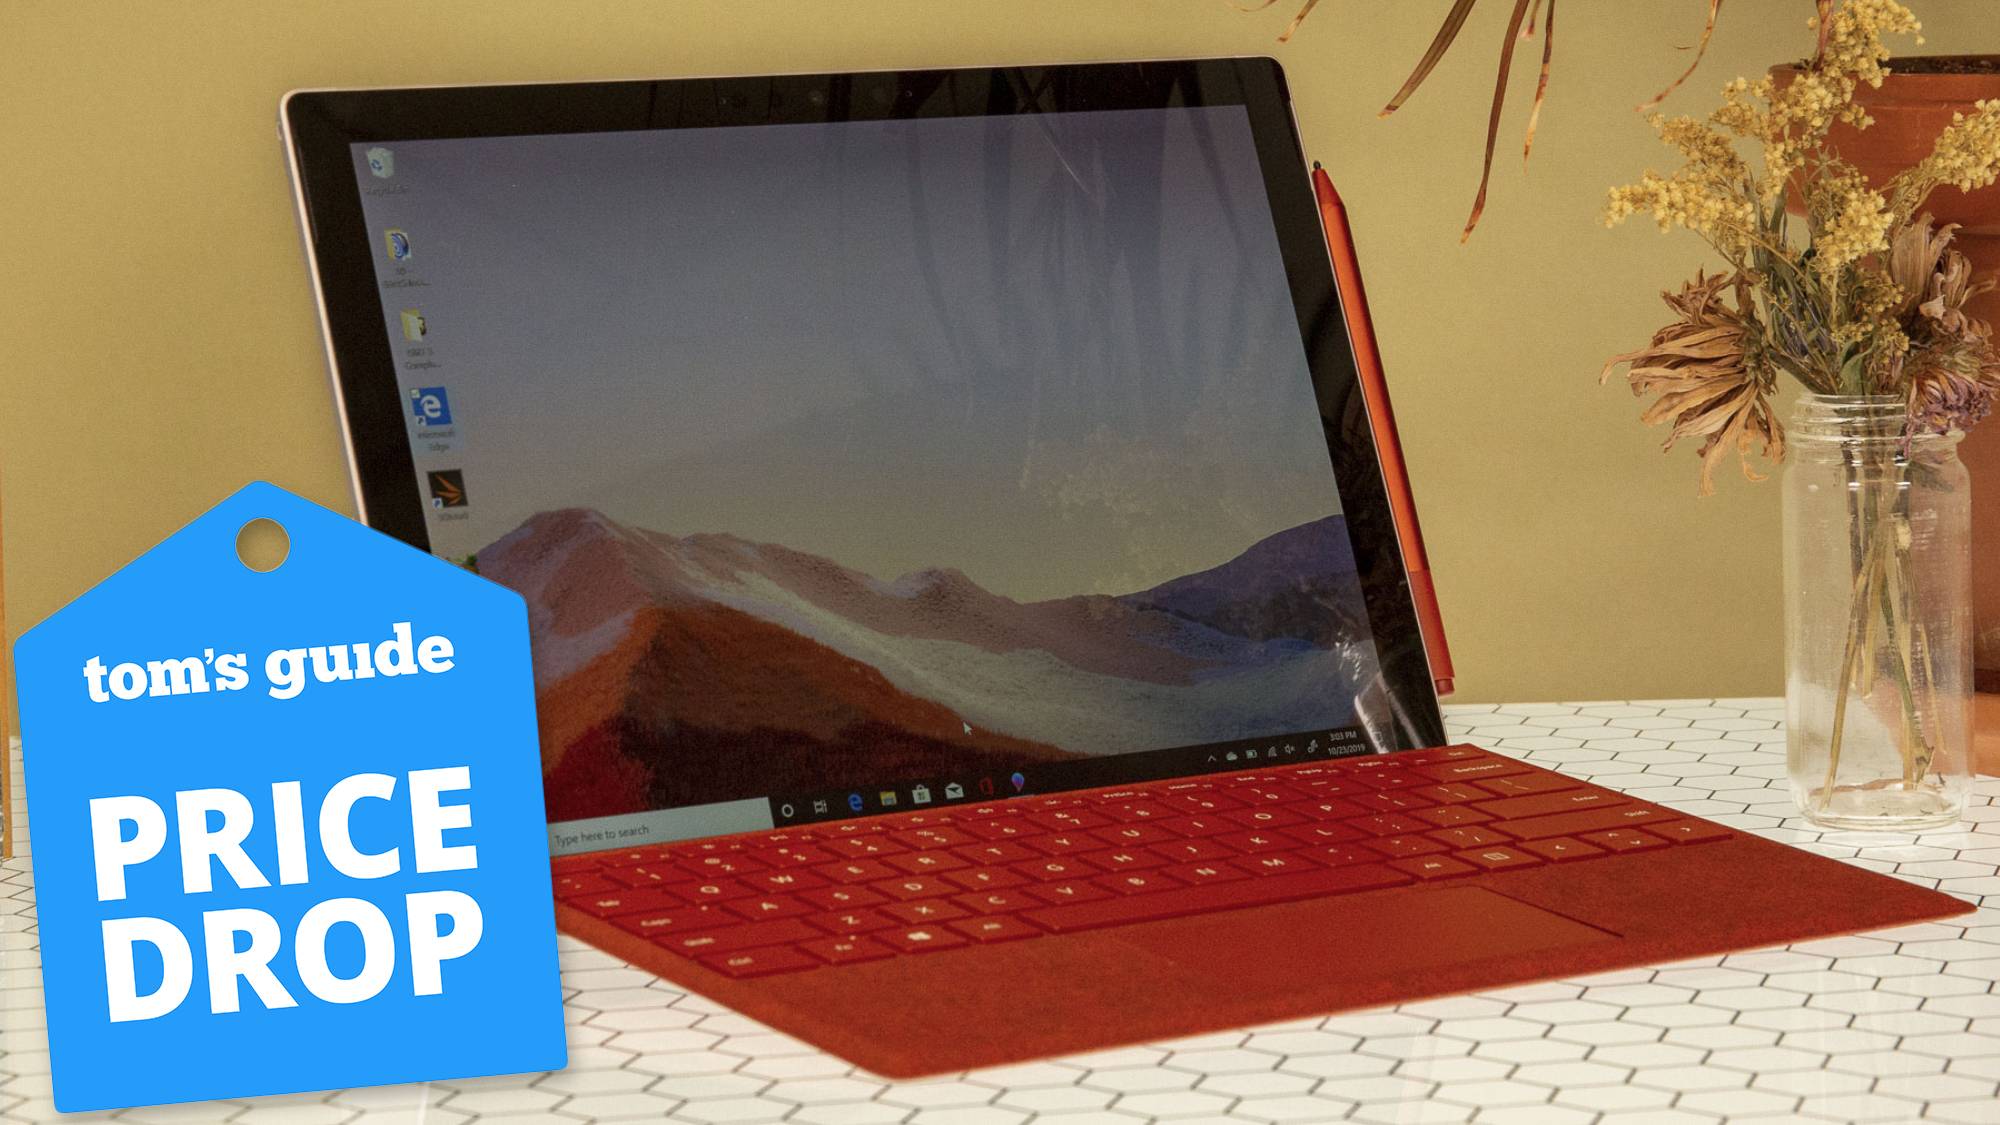 microsoft surface pro 7 with tom's guide deal tag